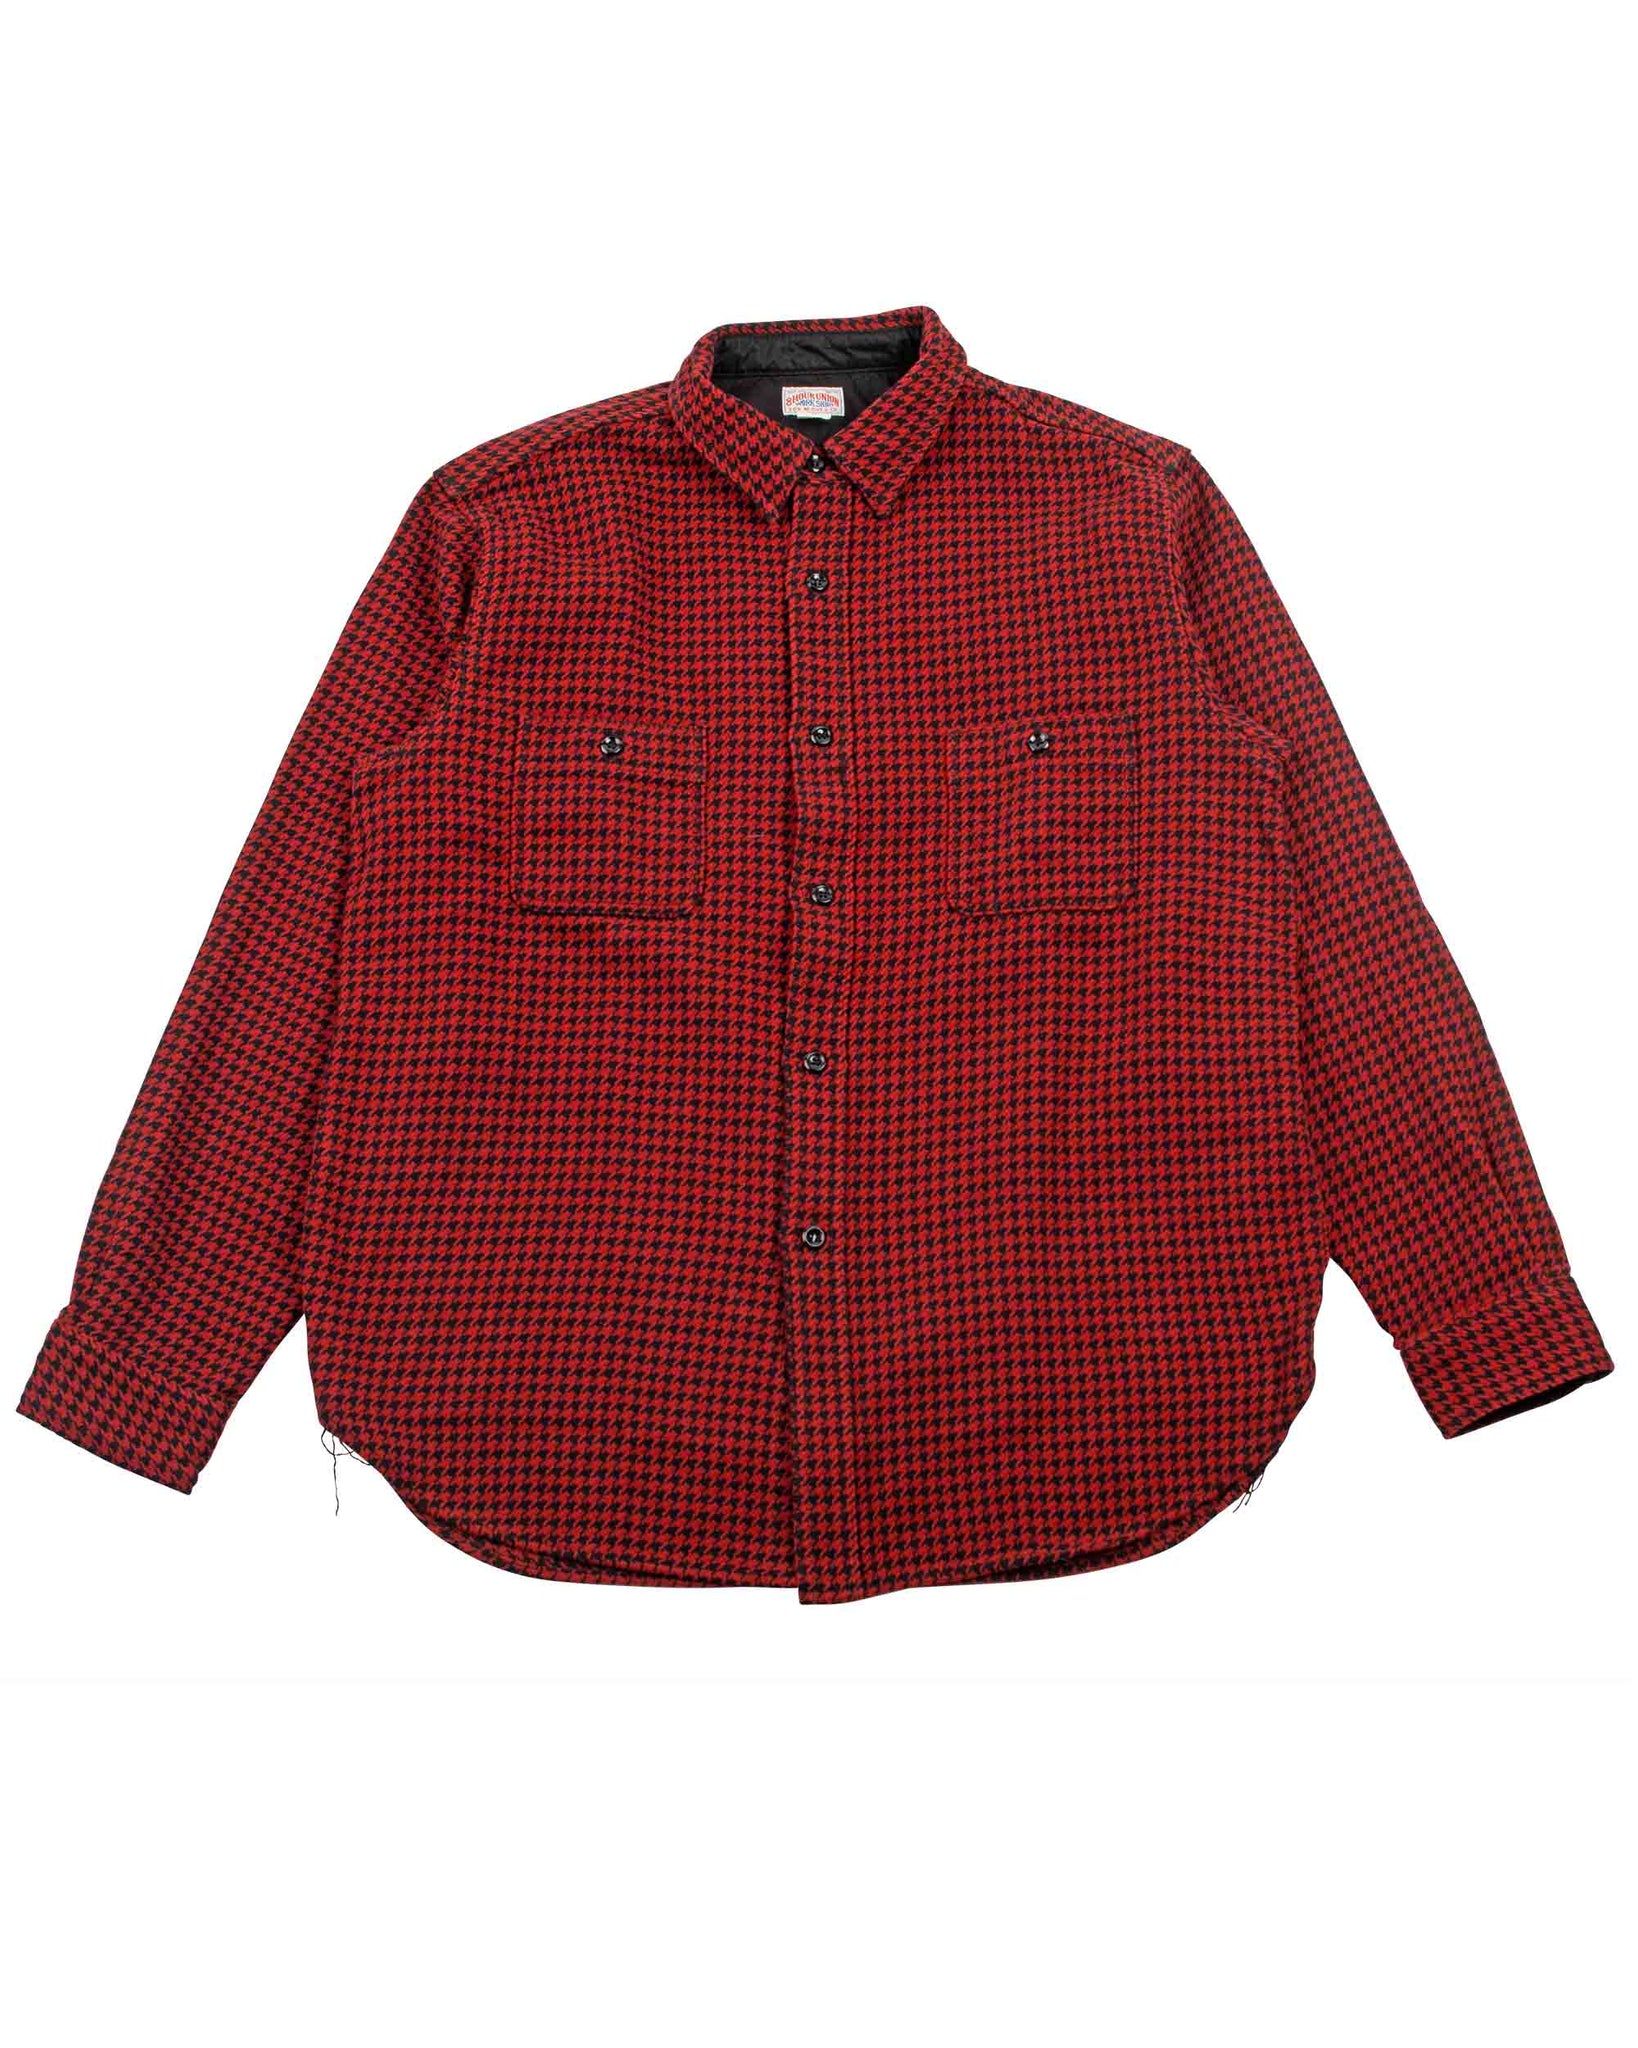 The Real McCoy's MS21102 8HU Houndstooth Flannel Shirt Red